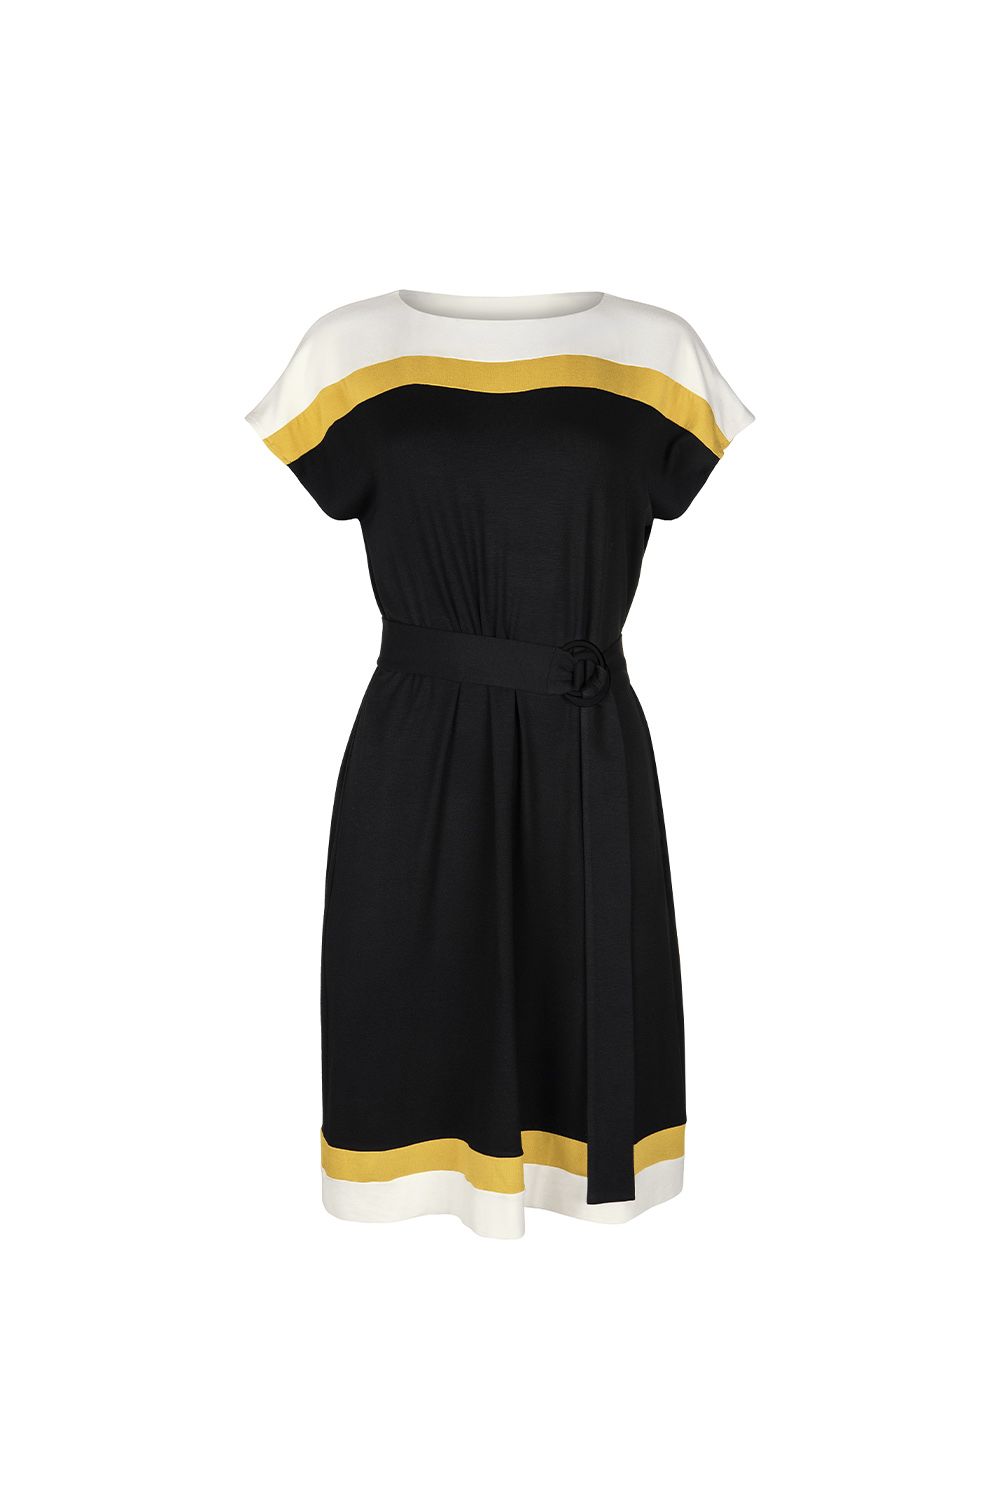 This casual dress from the Lisca ‘Saint Tropez’ range is suitable for beach or everyday wear. Features short sleeves, attractive coloured stripes, wearable belt with ring and is made of viscose knit that falls nicely along the body.